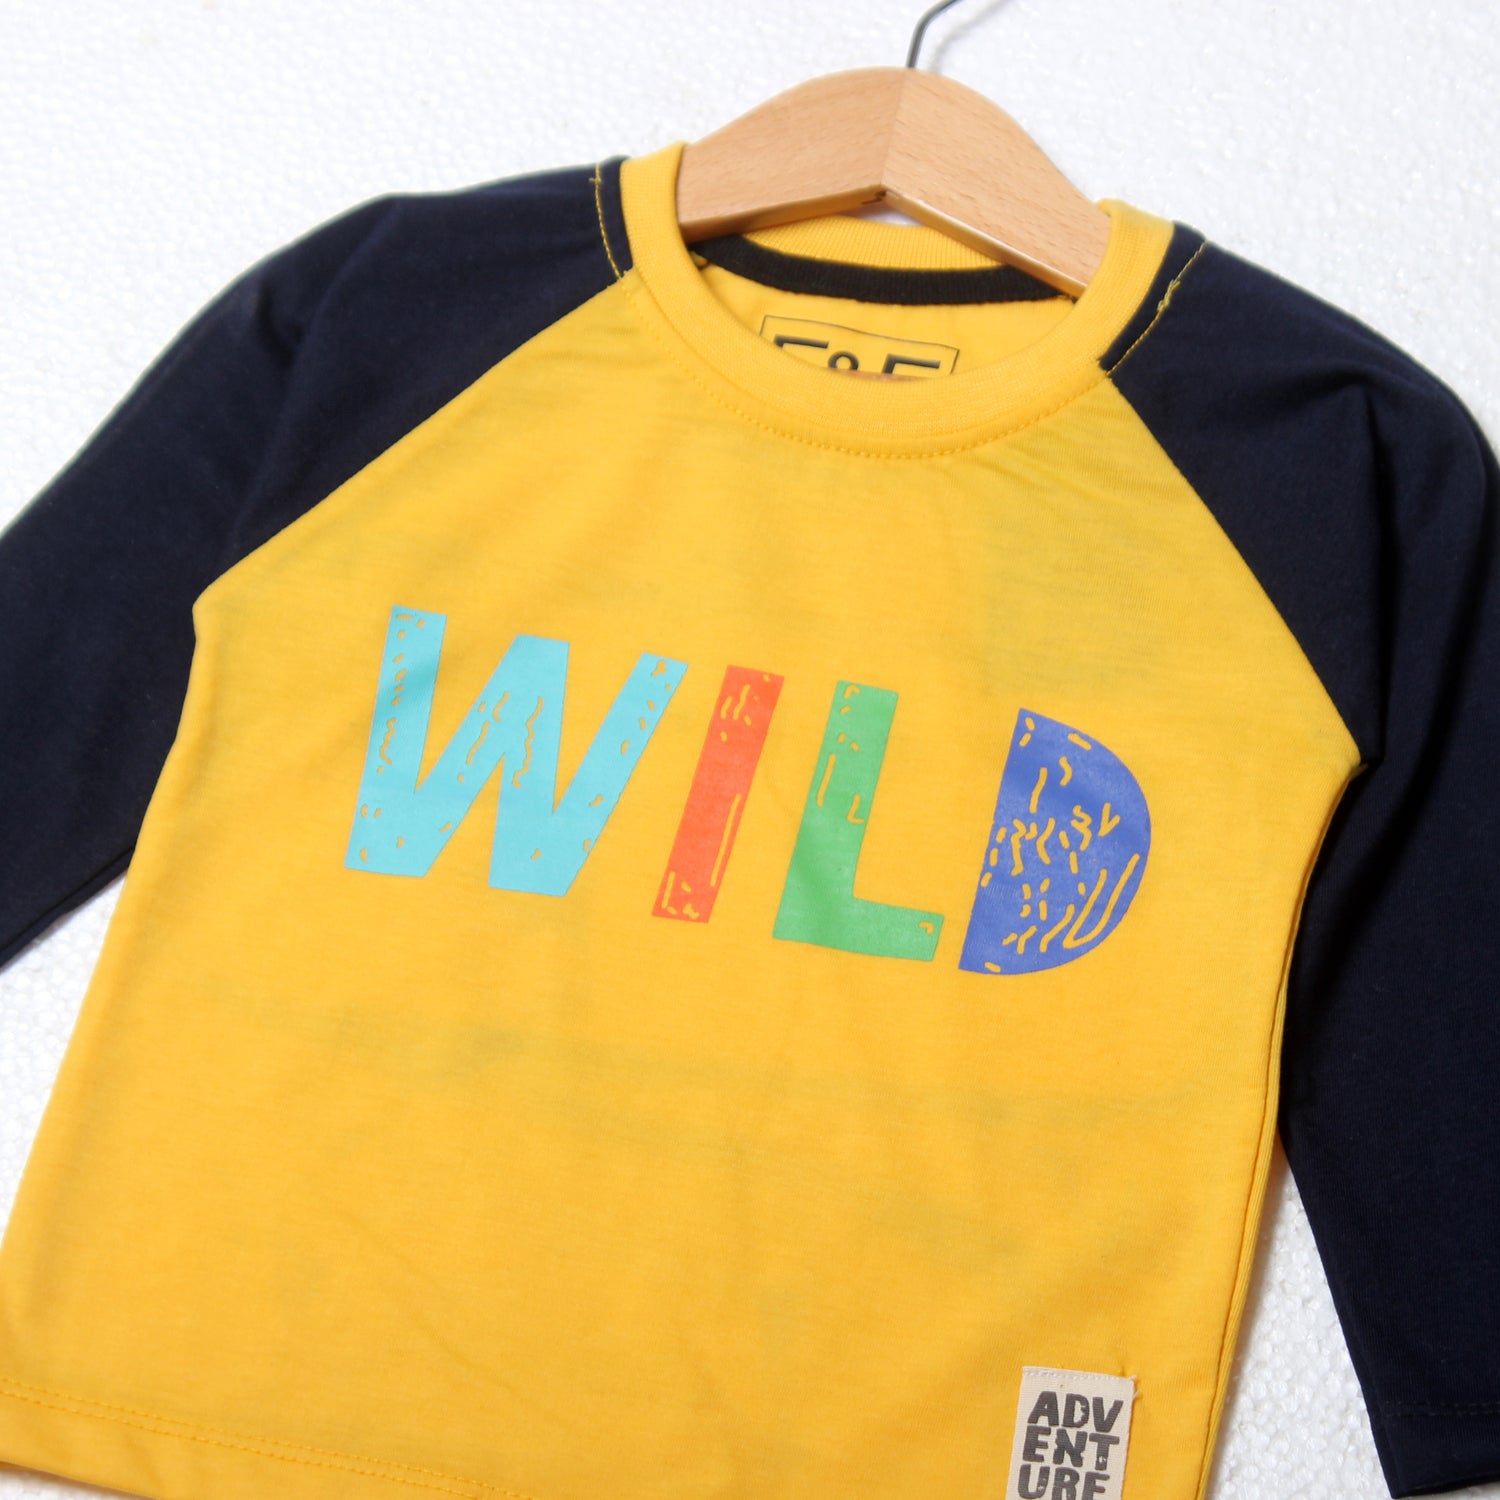 NEW YELLOW WITH BLACK SLEEVES WILD PRINTED FULL SLEEVE T-SHIRT